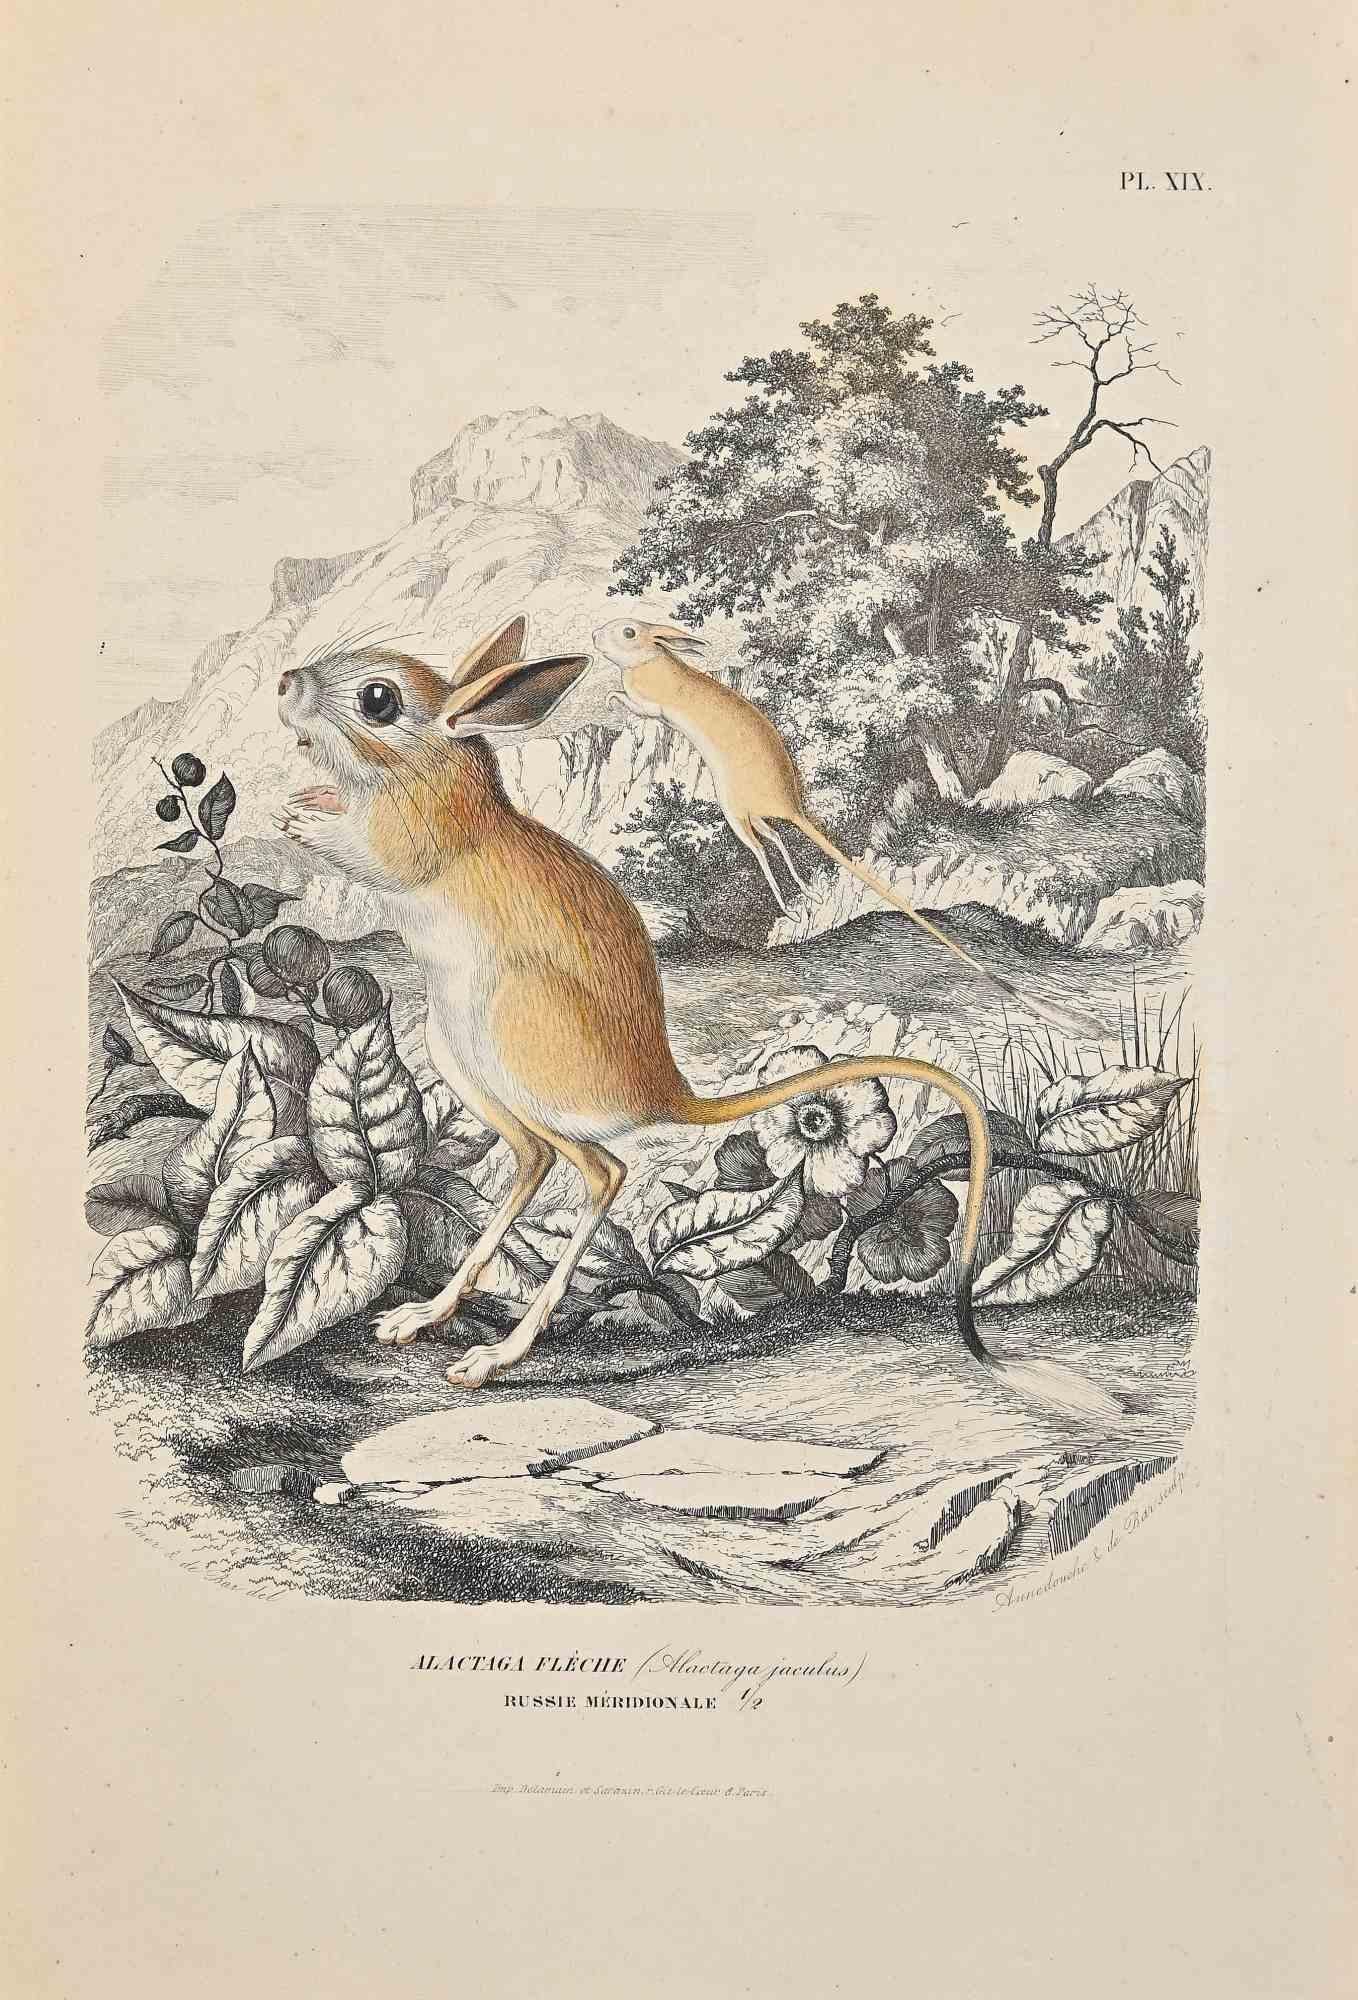 Alactaga Flèche is an original colored lithograph on ivory-colored paper, realized by Paul Gervais (1816-1879). The artwork is from The Series of "Les Trois Règnes de la Nature", and was published in 1854.

Good conditions.

Titled on the